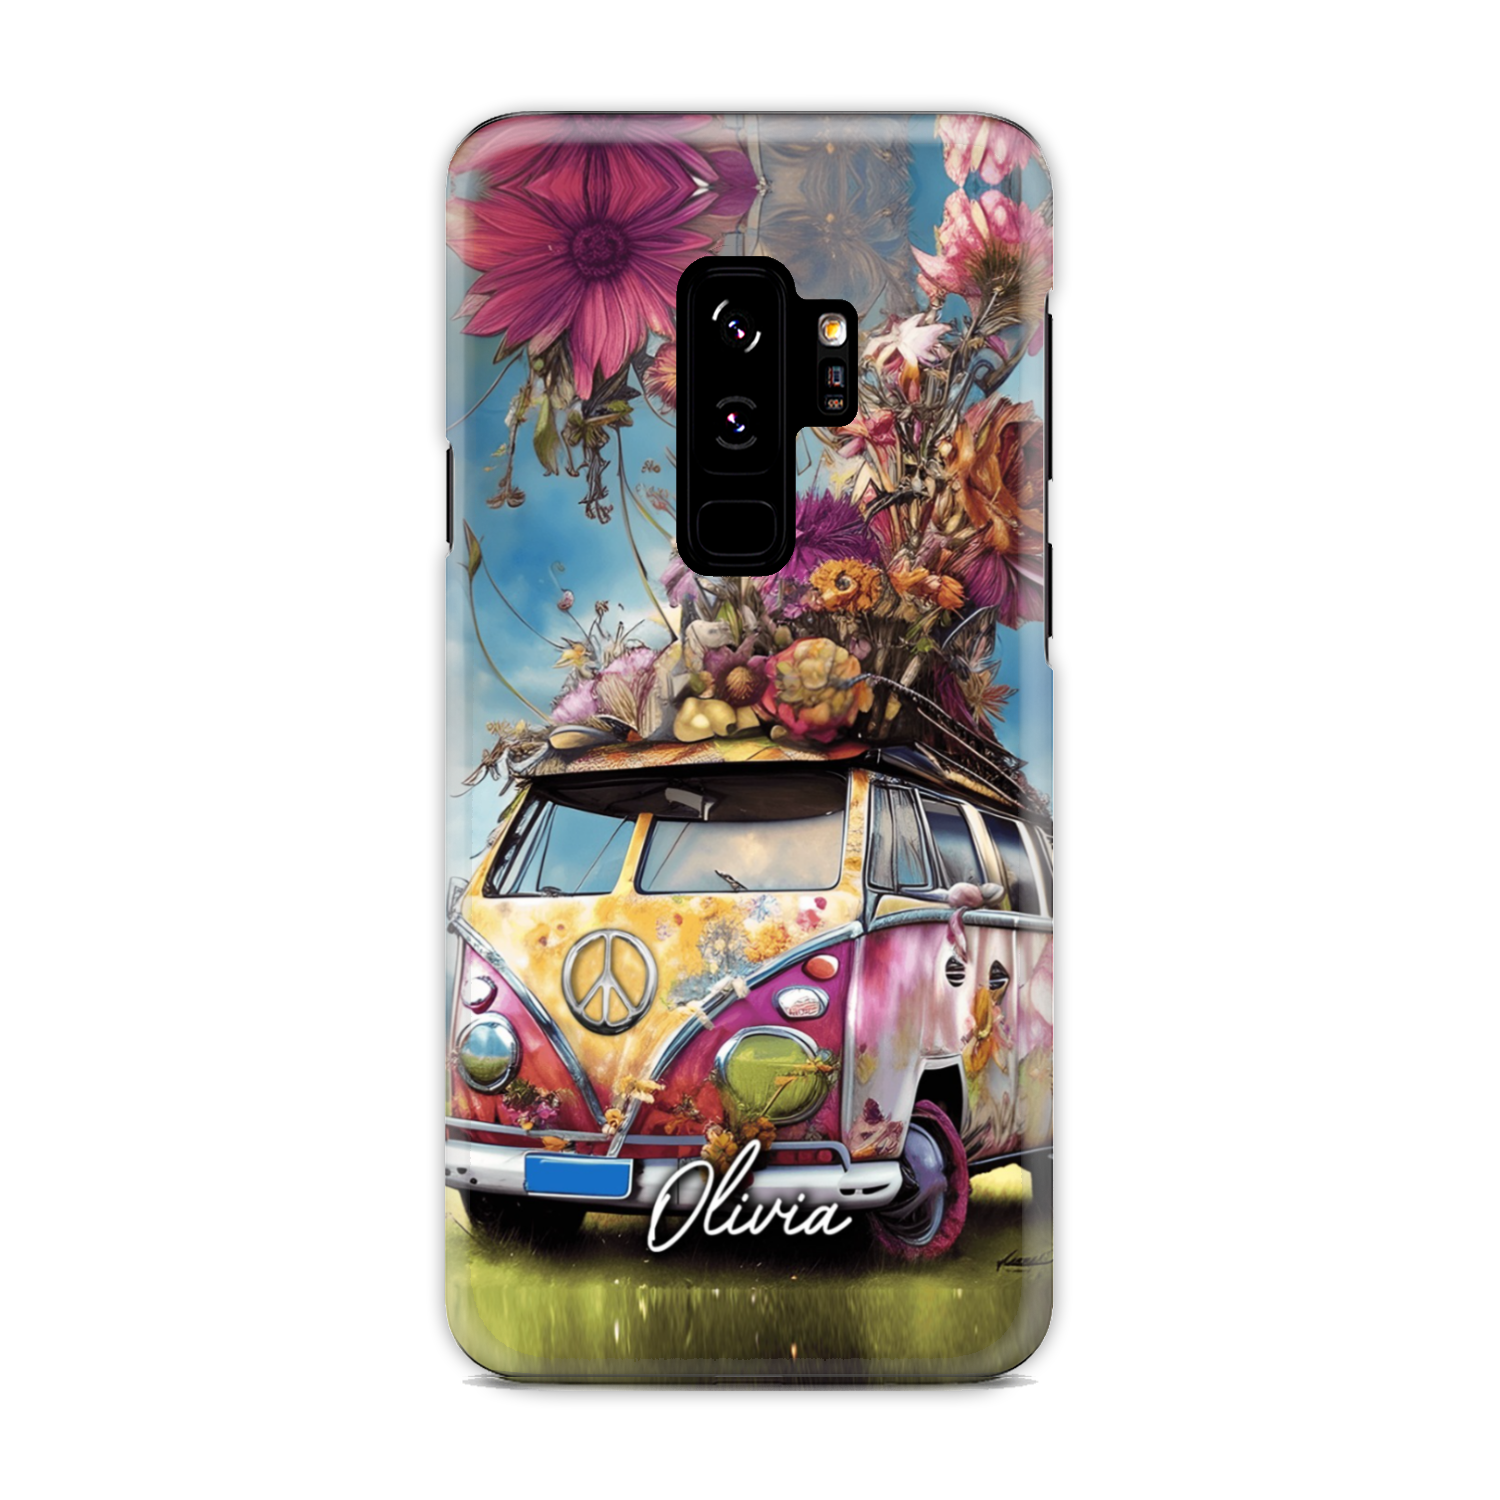 PERSONALIZED BOHEMIAN FLORAL BUS PHONE CASE - TA2002236